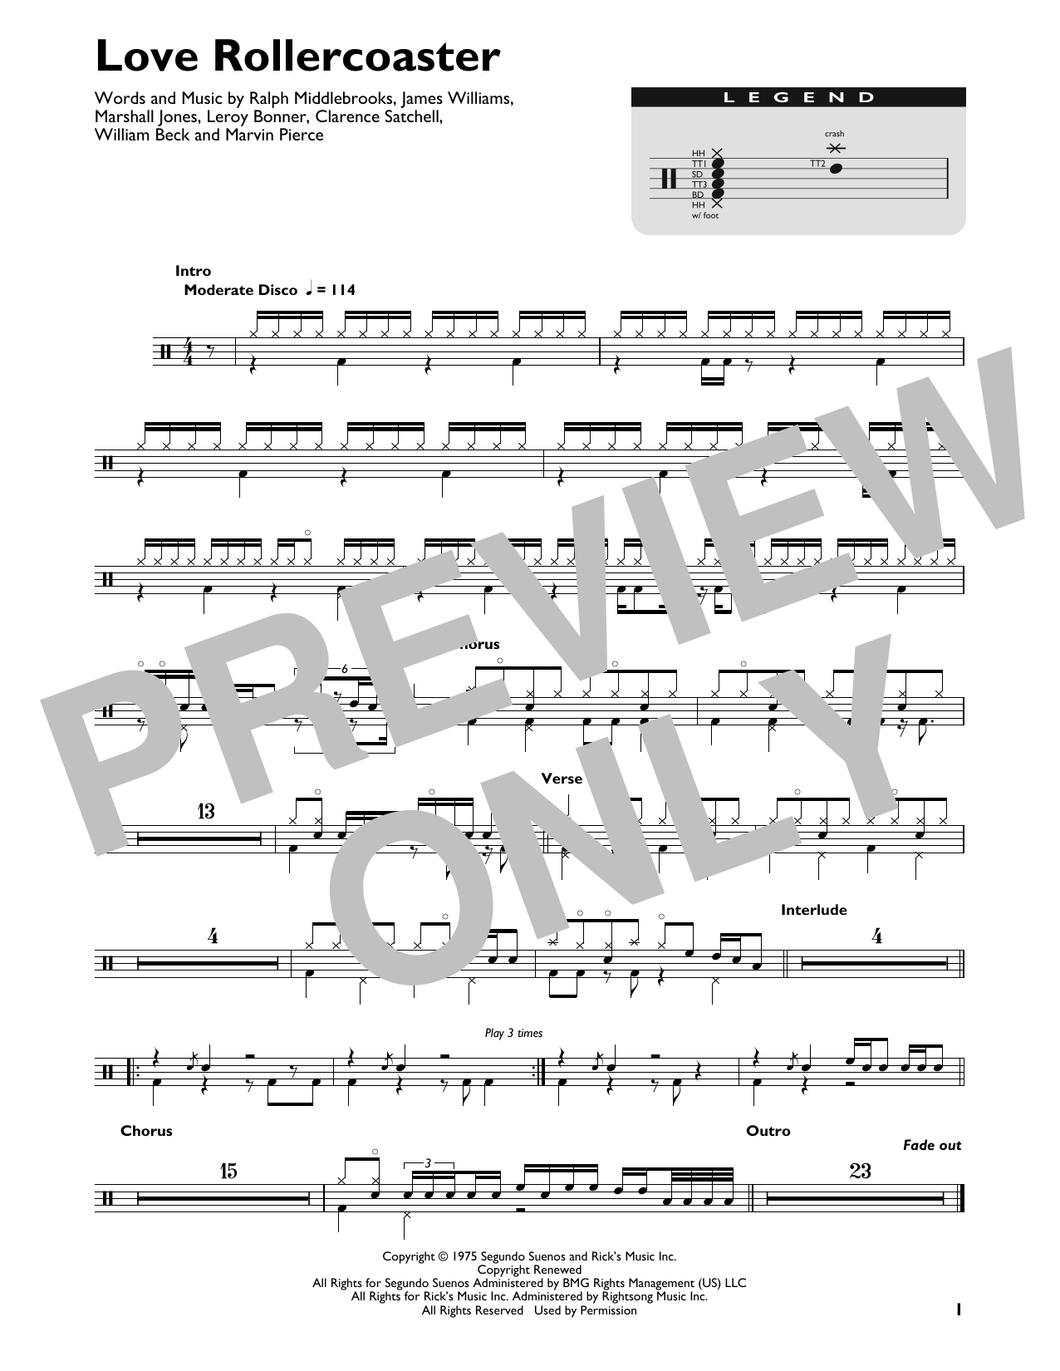 Love Rollercoaster - Ohio Players - Full Drum Transcription / Drum Sheet Music - SheetMusicDirect DT